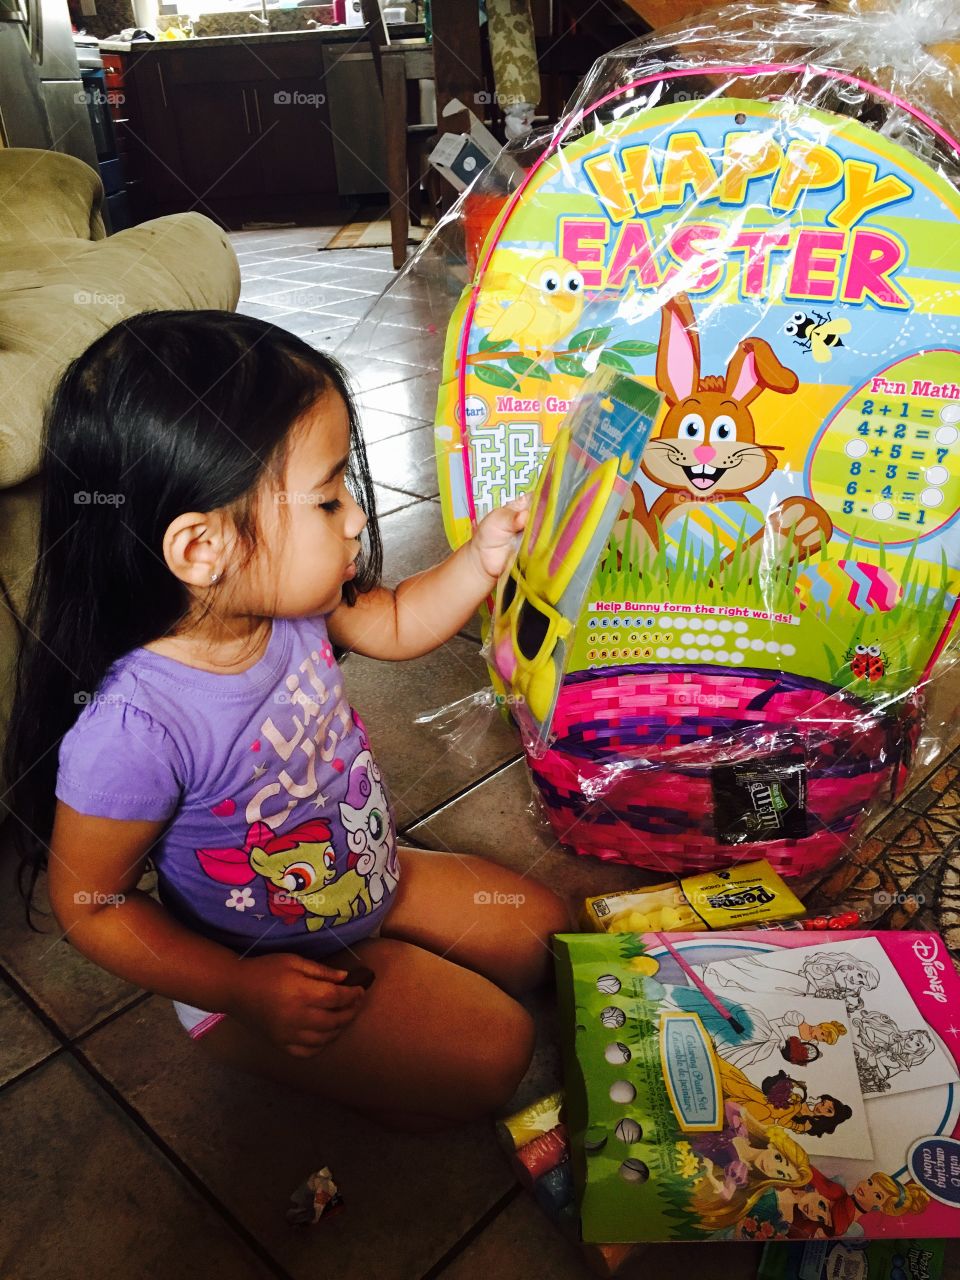 Opening her Easter gifts